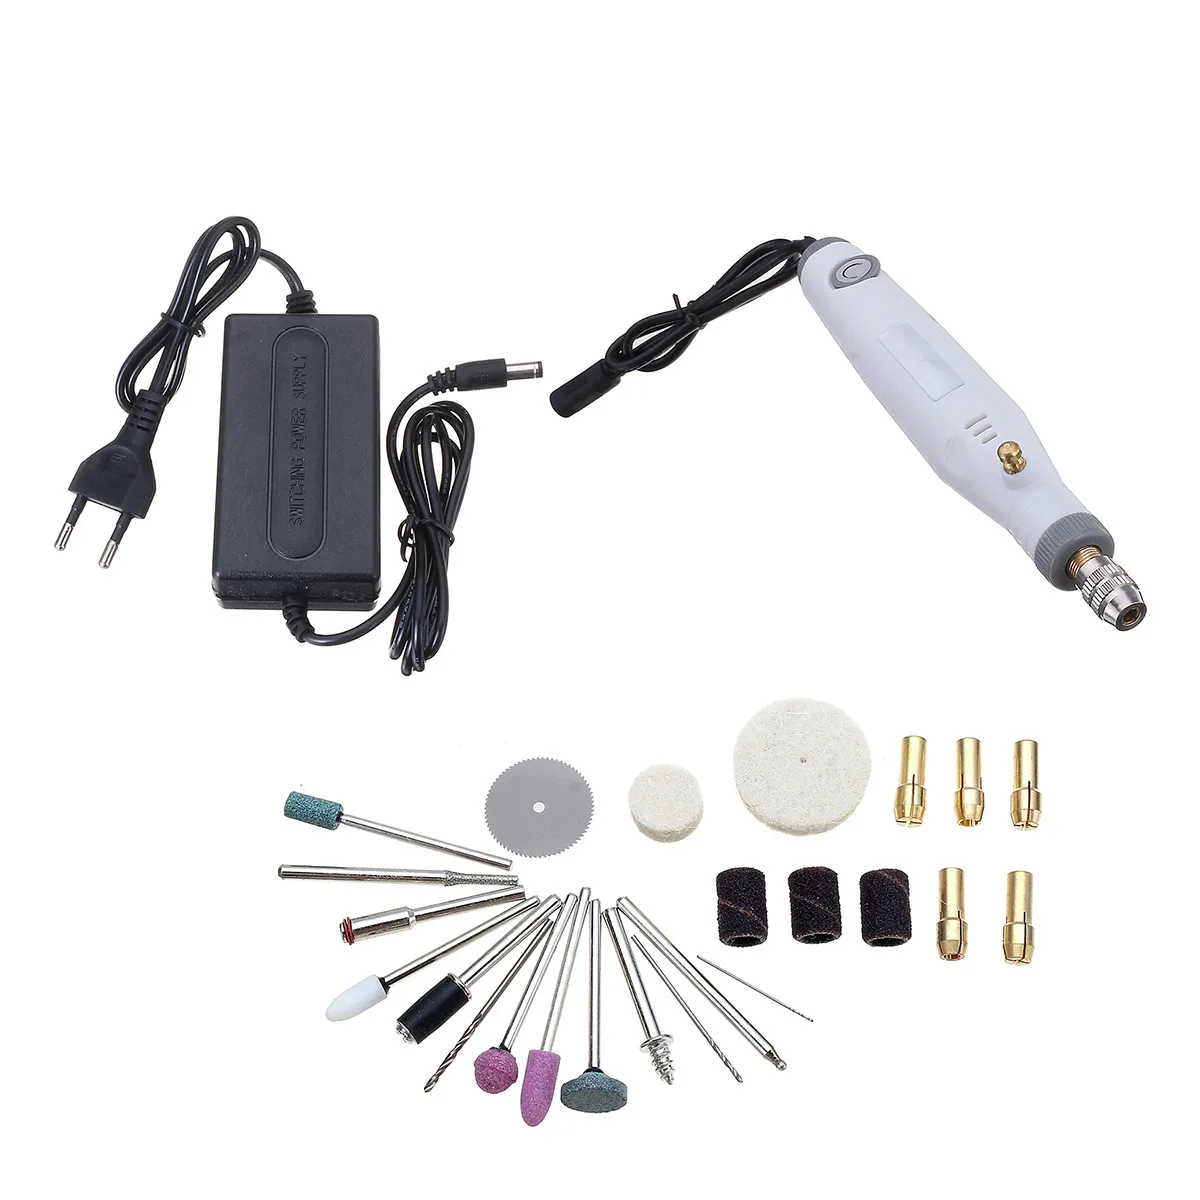 
18W Mini Electric Grinder Polisher Drill Variable Engraving Pen Tools Electric Drill Kit Variable Speed Grinder Pen 220V/110V 